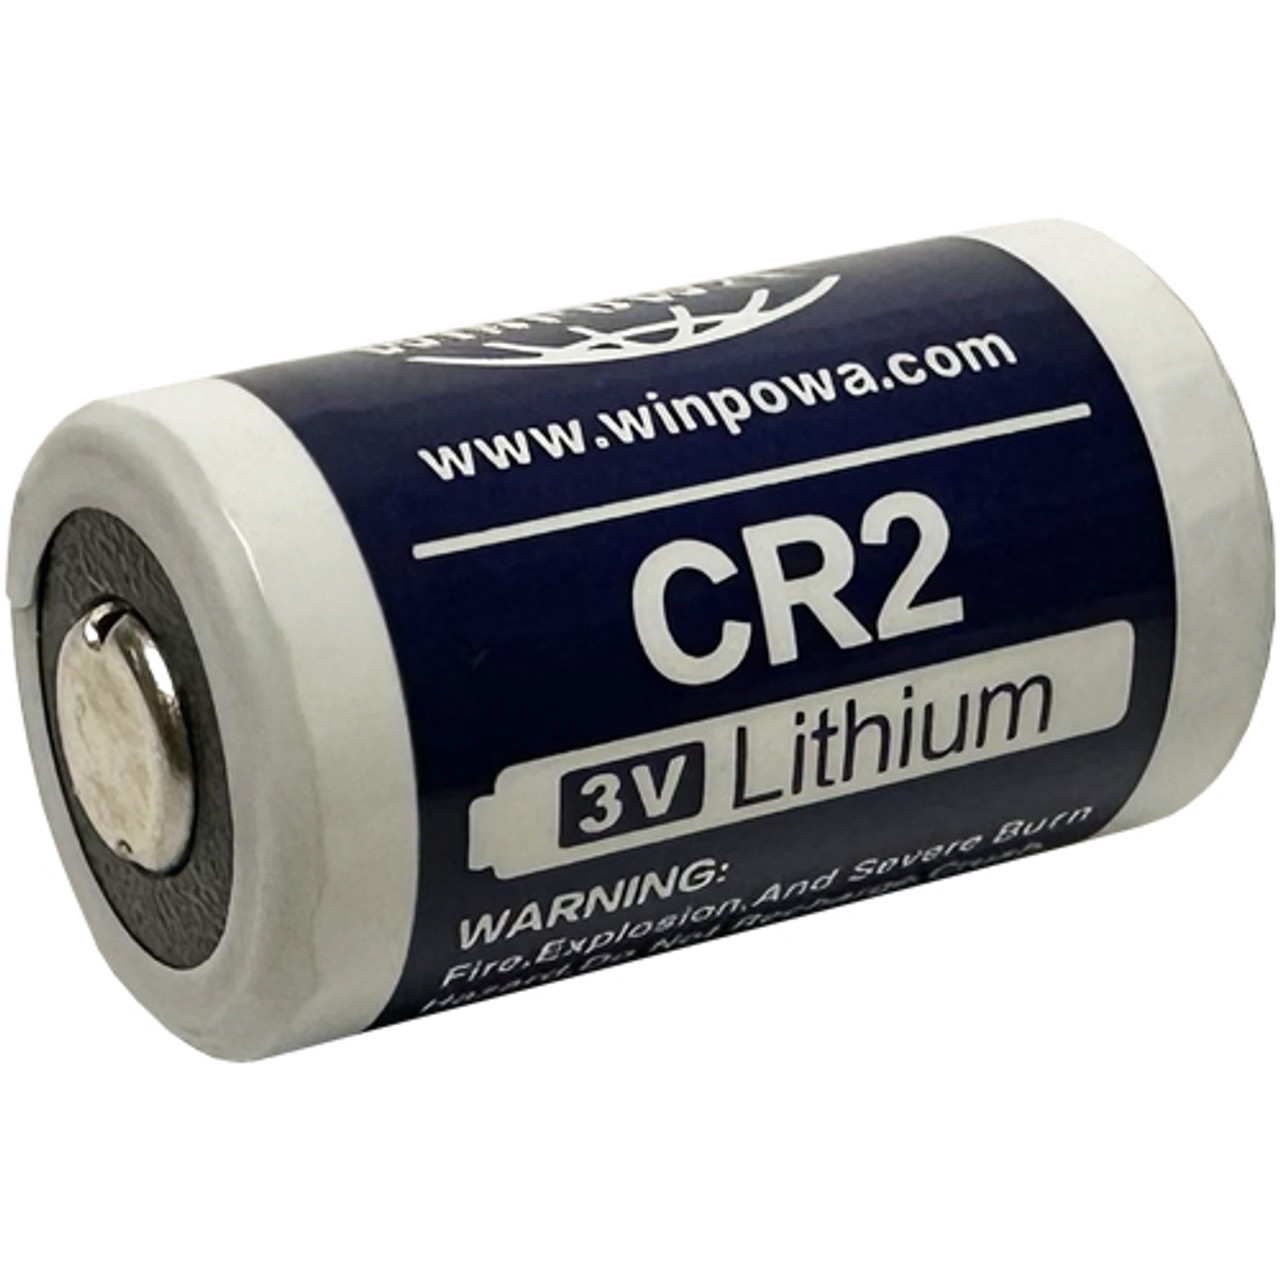 China Best 3V CR2 Lithium Battery Suppliers & Manufacturers & Factory -  Wholesale Price - WinPow